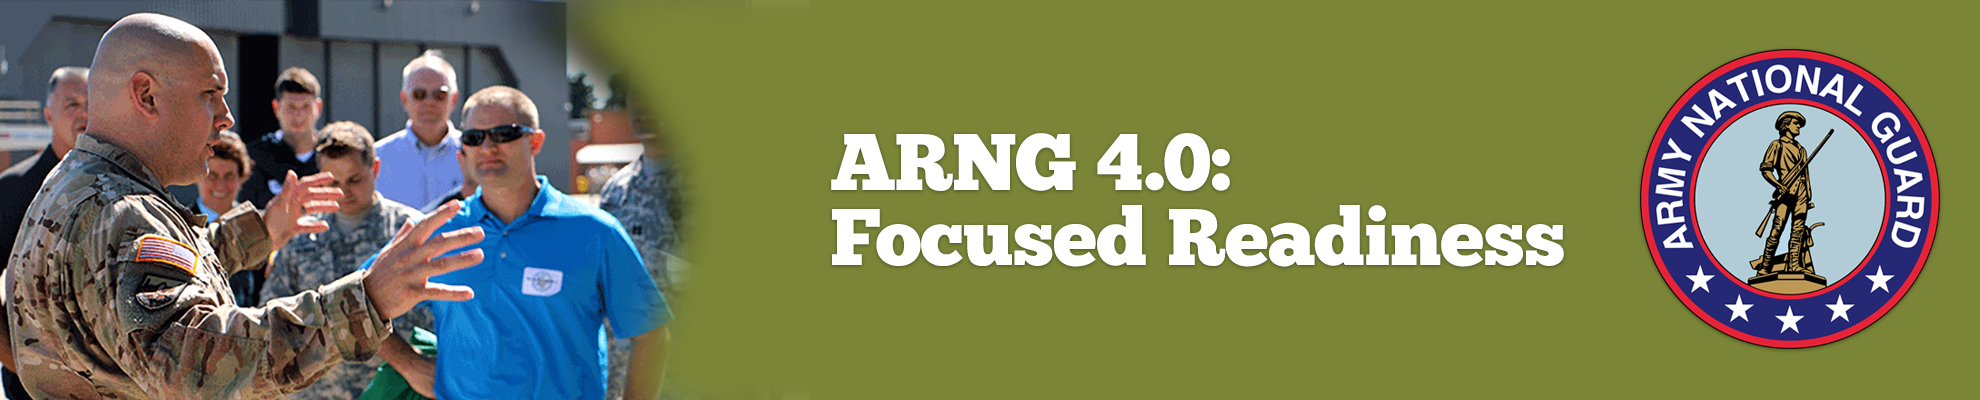 ARNG 4.0: Focused Readiness